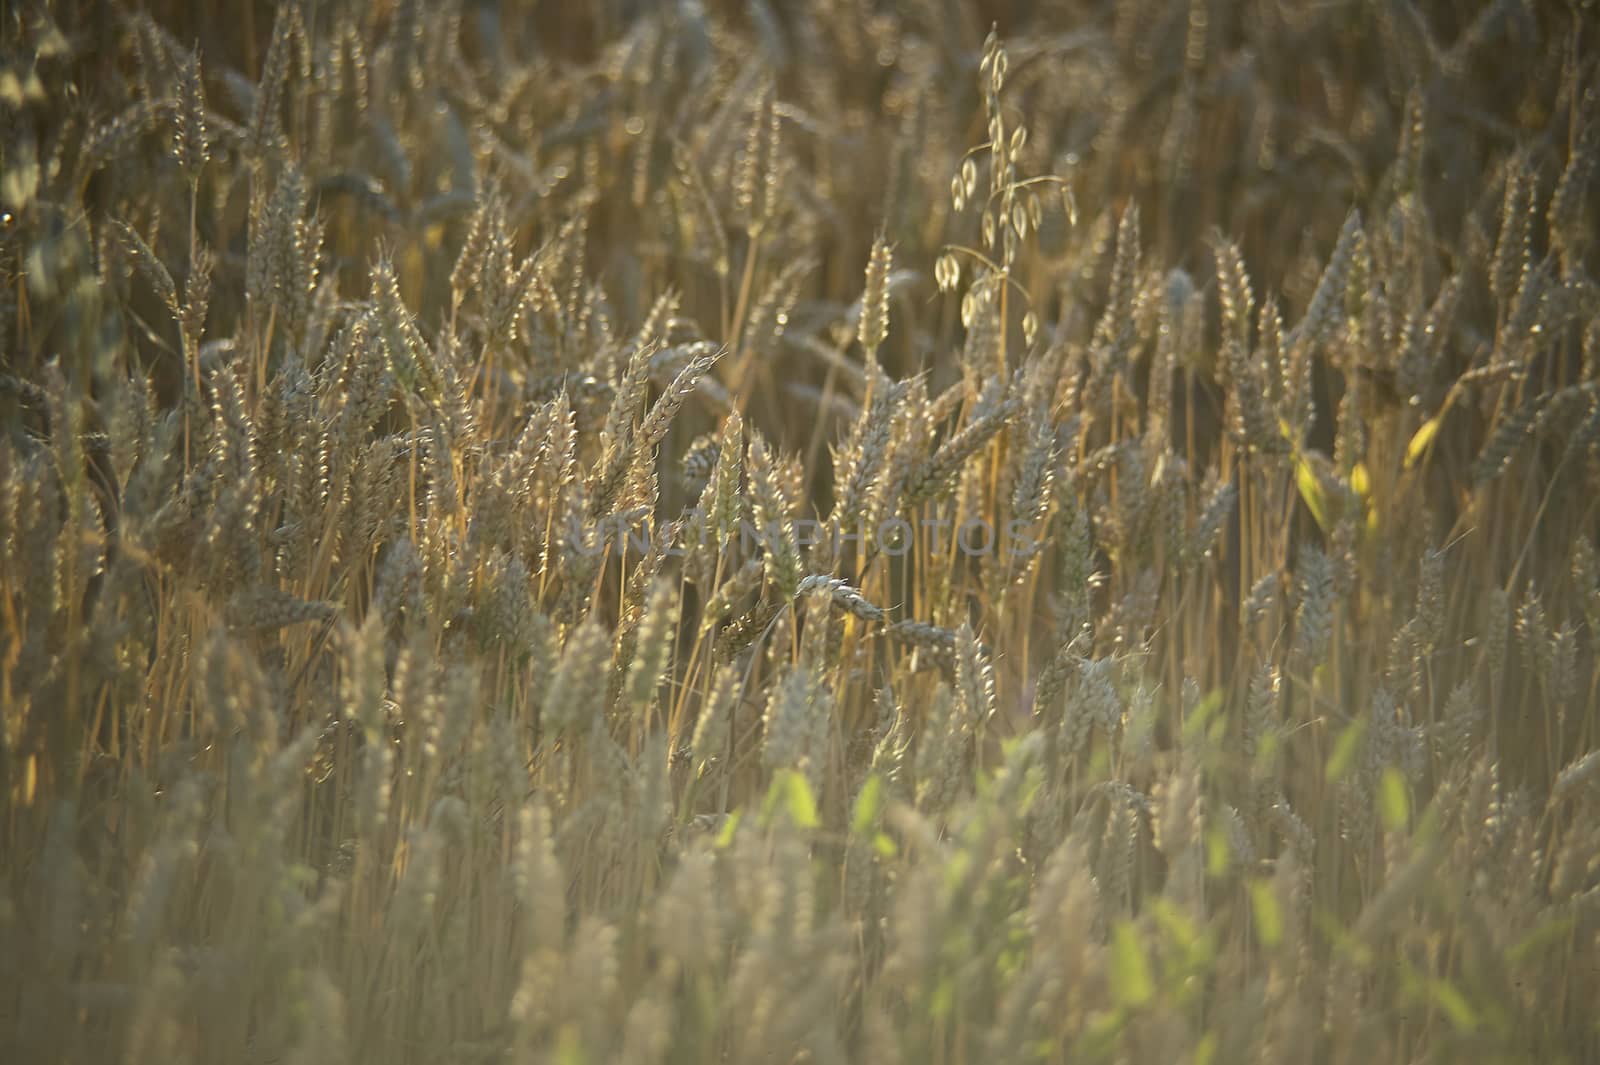 Resuming at sunset of a grain crop in italy, grain now ready for harvest.